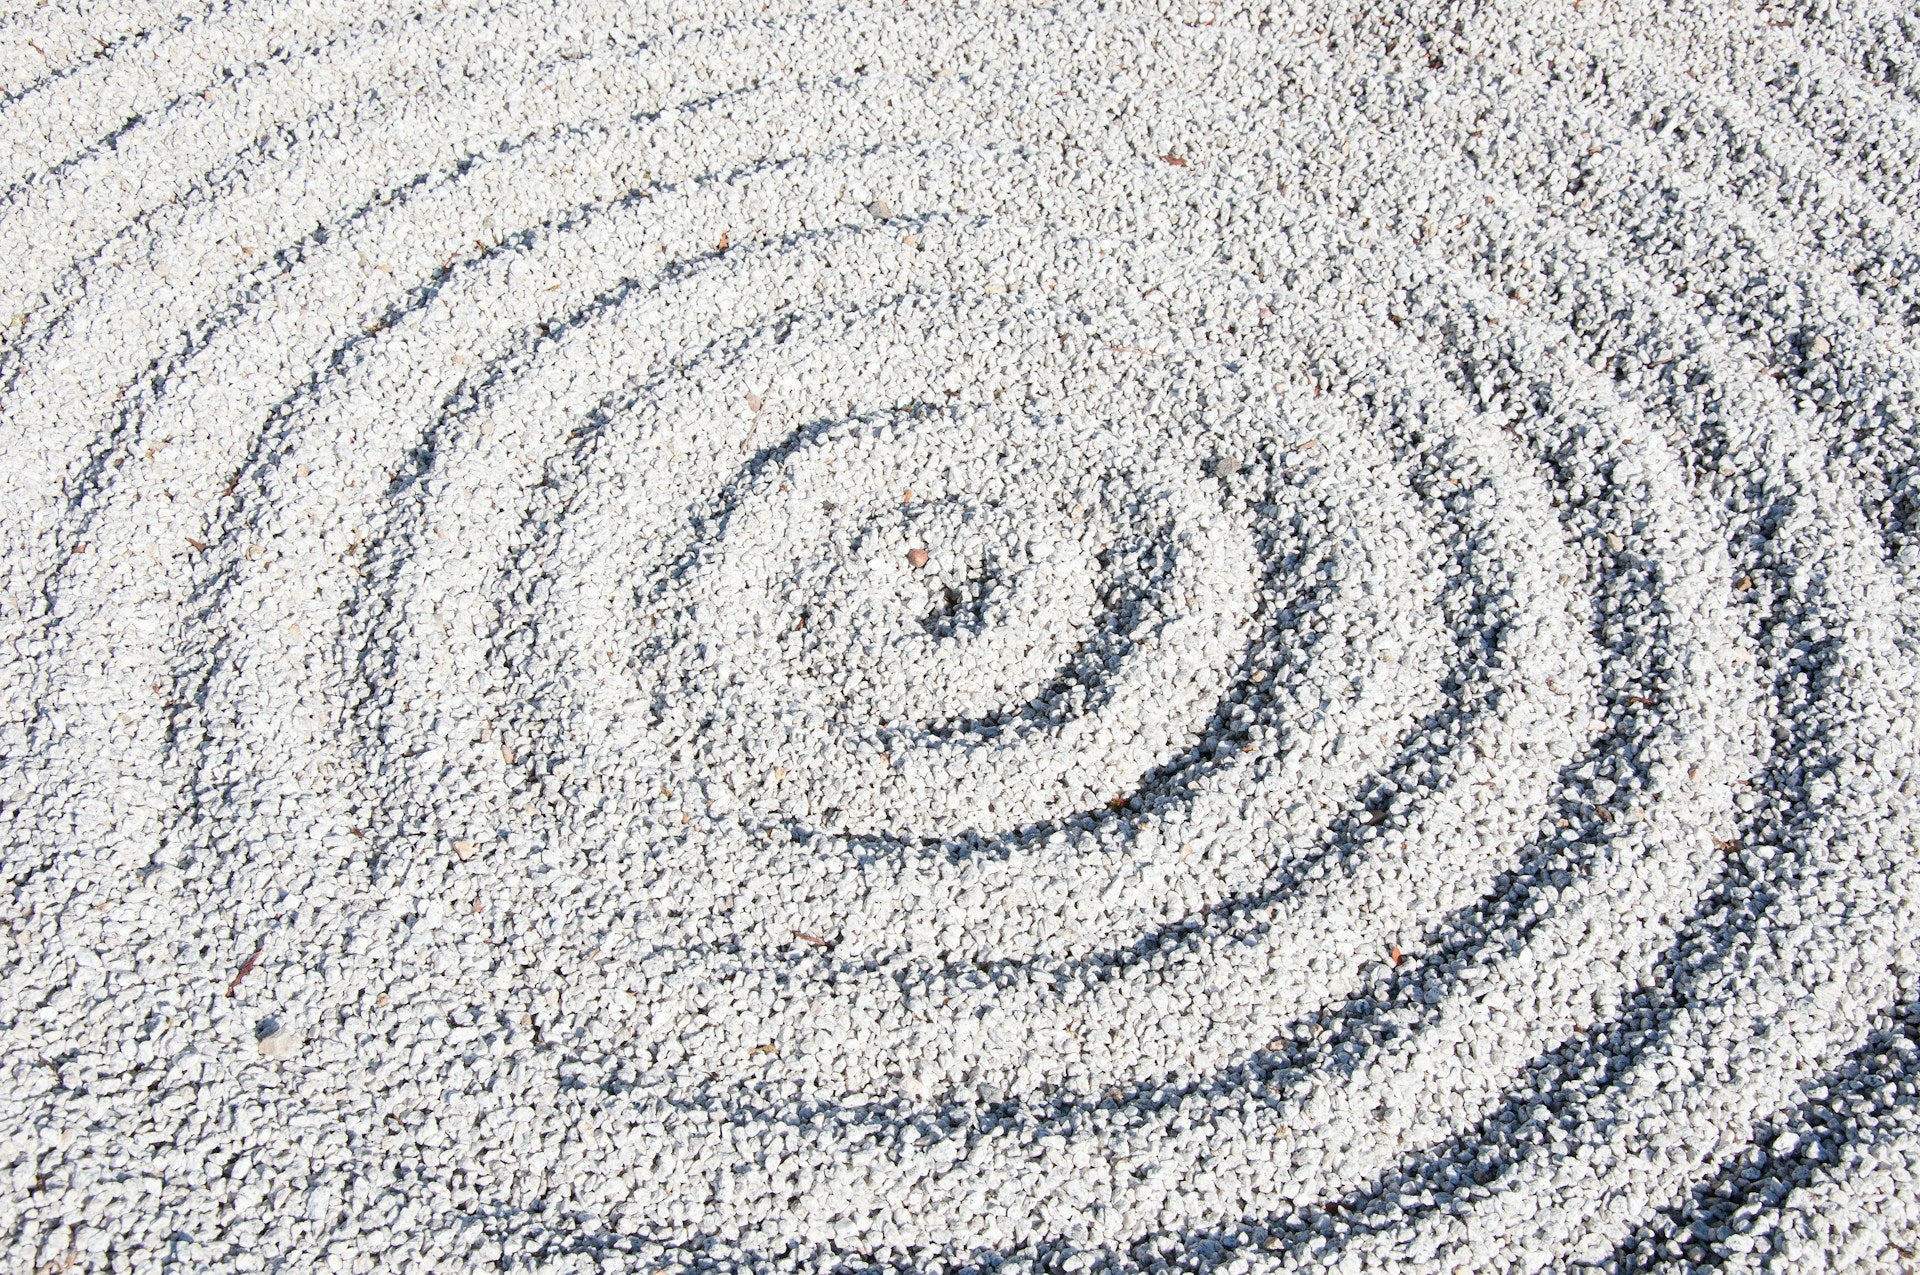 An image of small rocks in a spiral pattern on the ground.